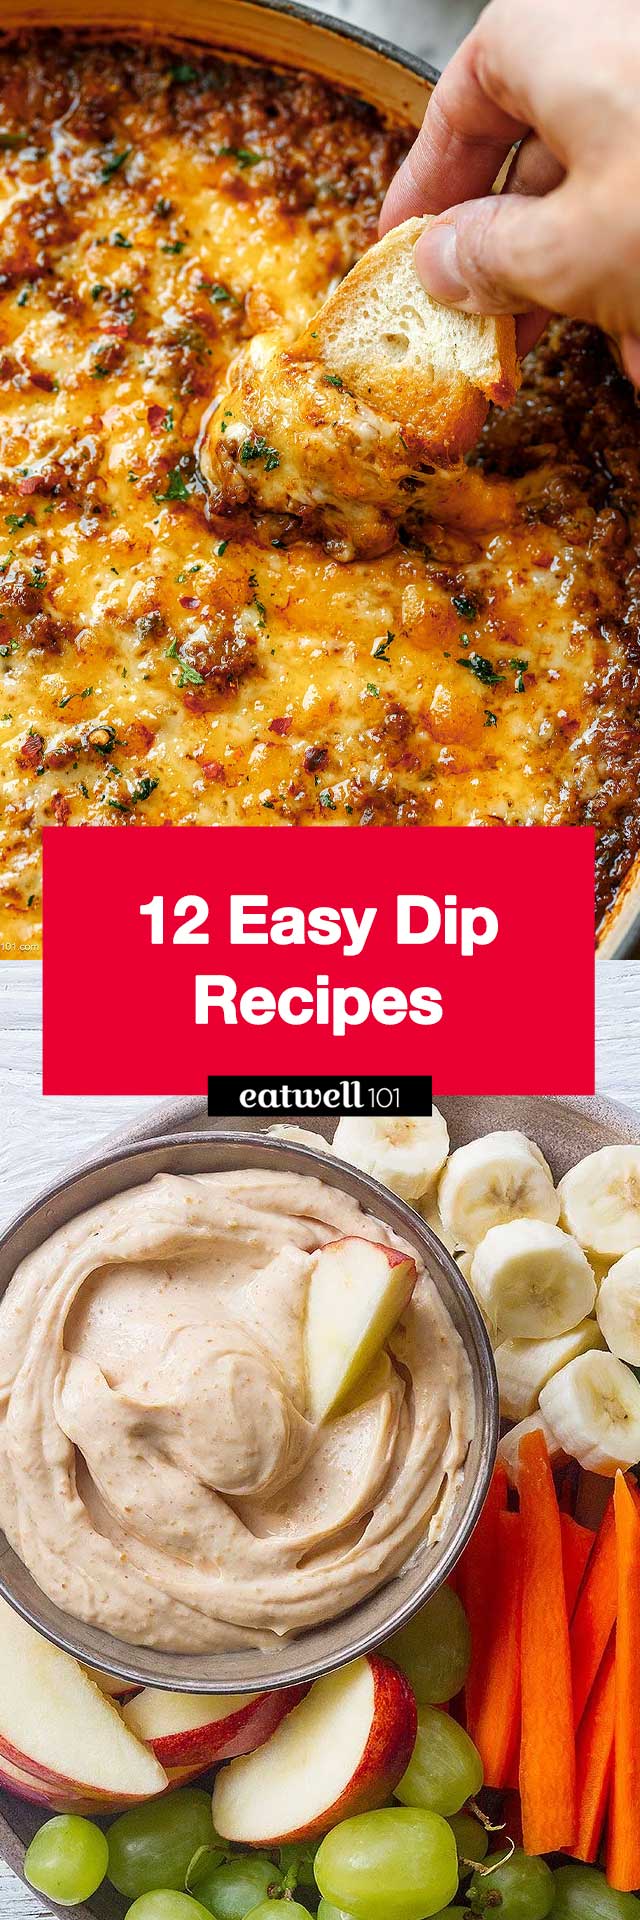 12 Easy Dip Recipes for Your Next Party - #dip #recipes #eatwell101 - Find 12 crowd-pleasing dip recipes perfect for appetizers or potluck gatherings! Including recipes for ground beef dips, cheesy dips, vegetable dips, and more!